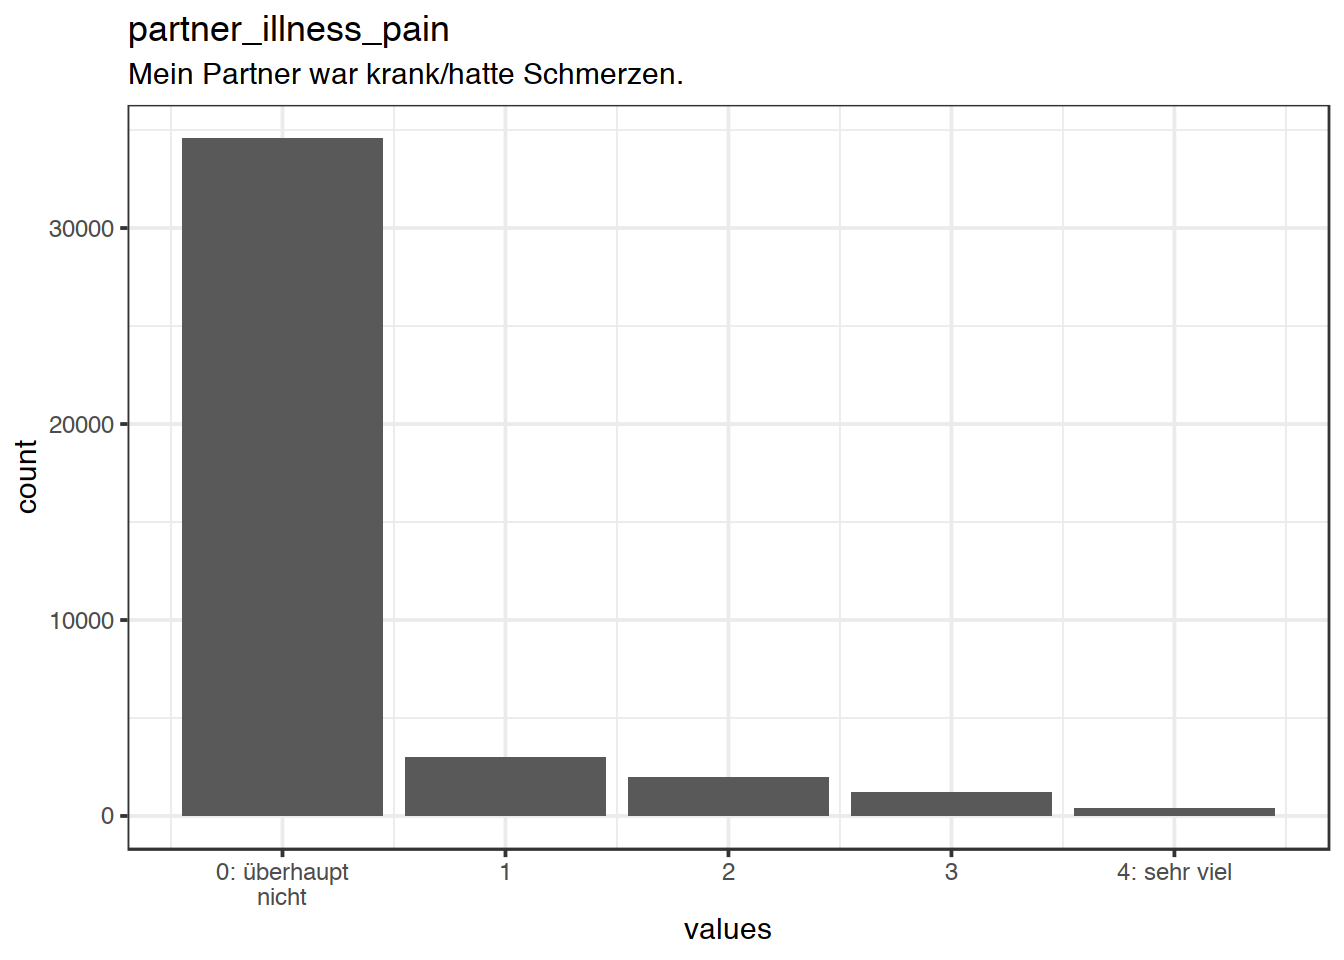 Distribution of values for partner_illness_pain